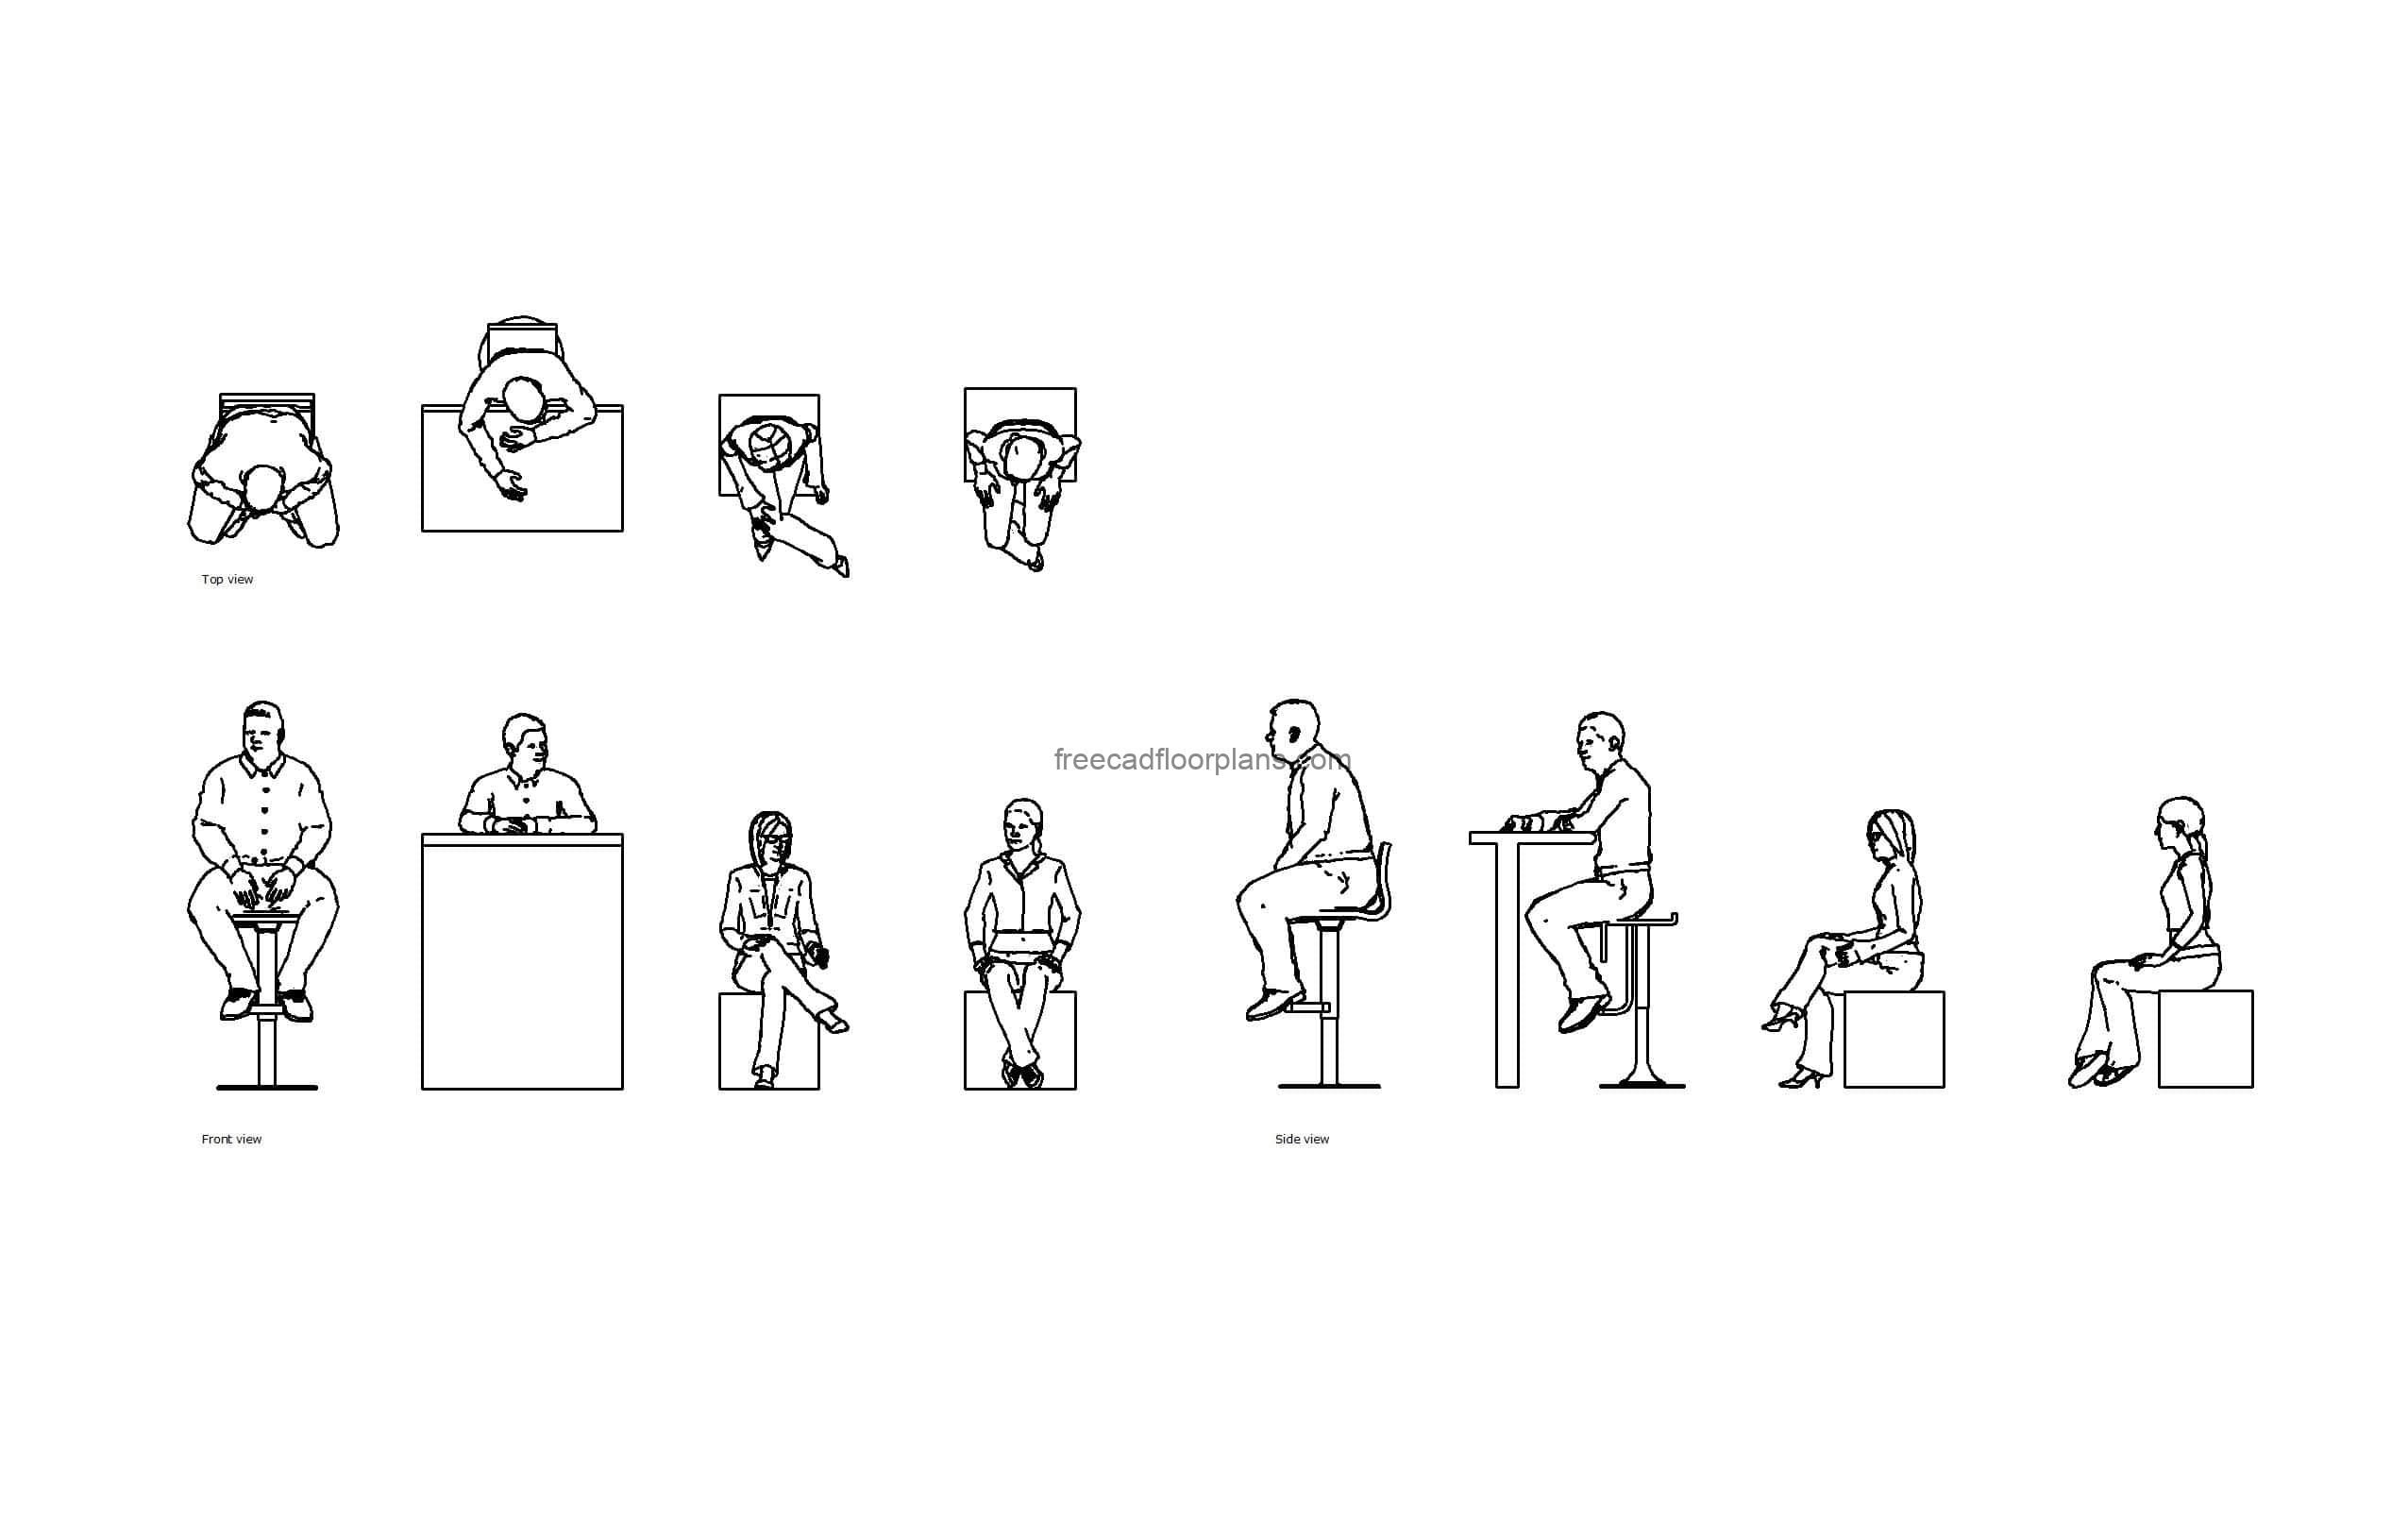 autocad drawing of different people sitting, plan and elevation 2d views, dwg file free for download